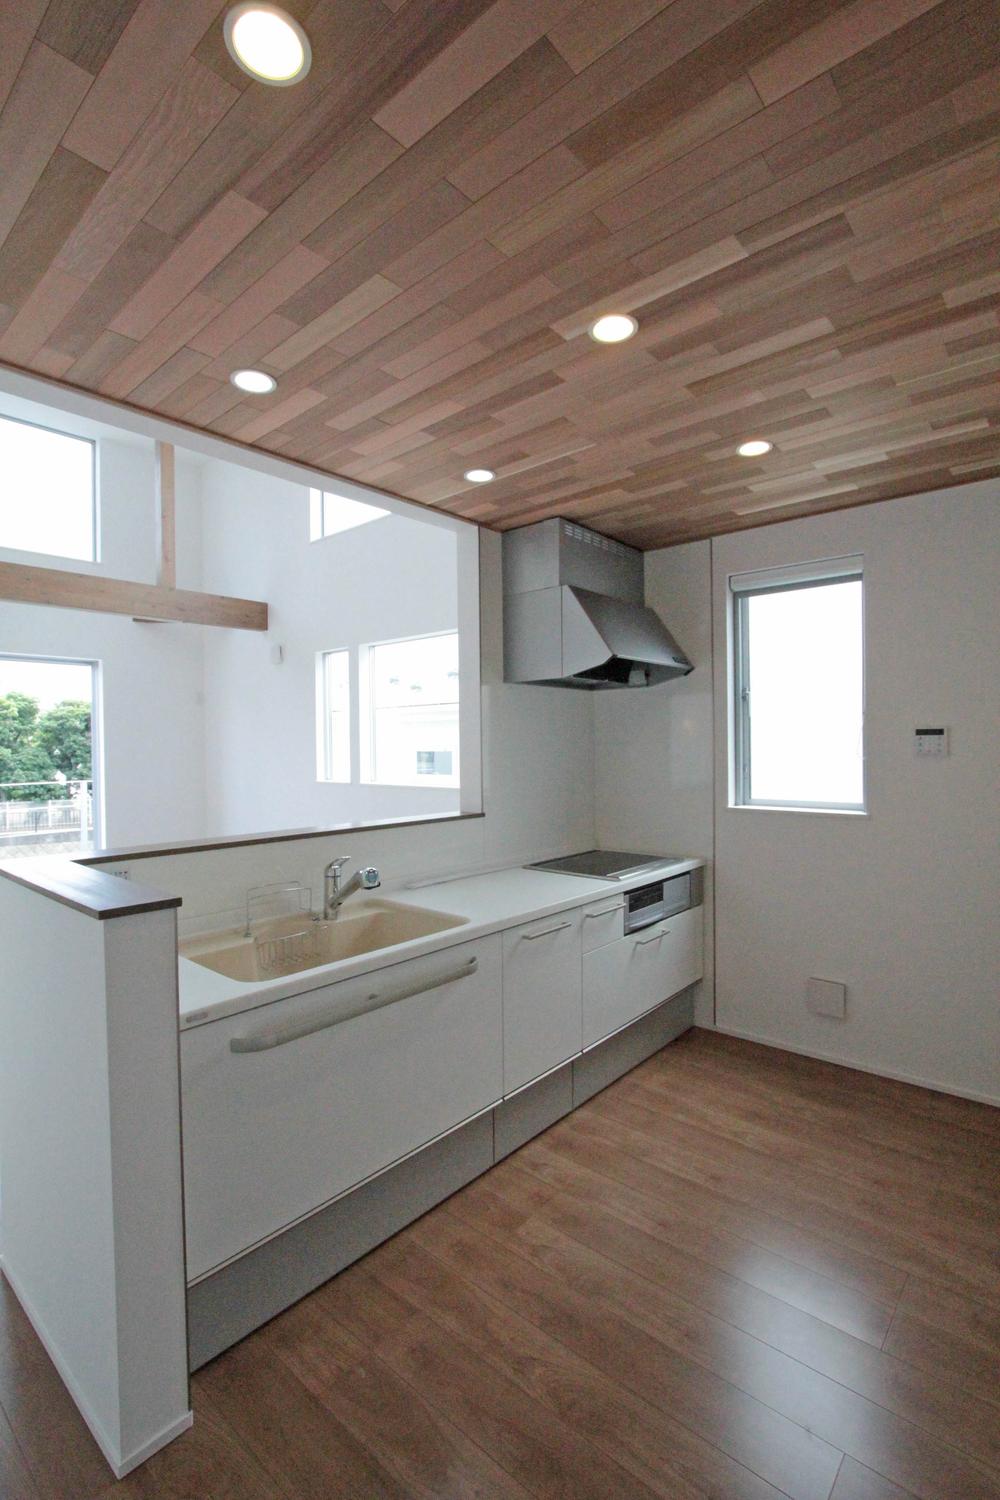 Same specifications photo (kitchen). Interior construction results